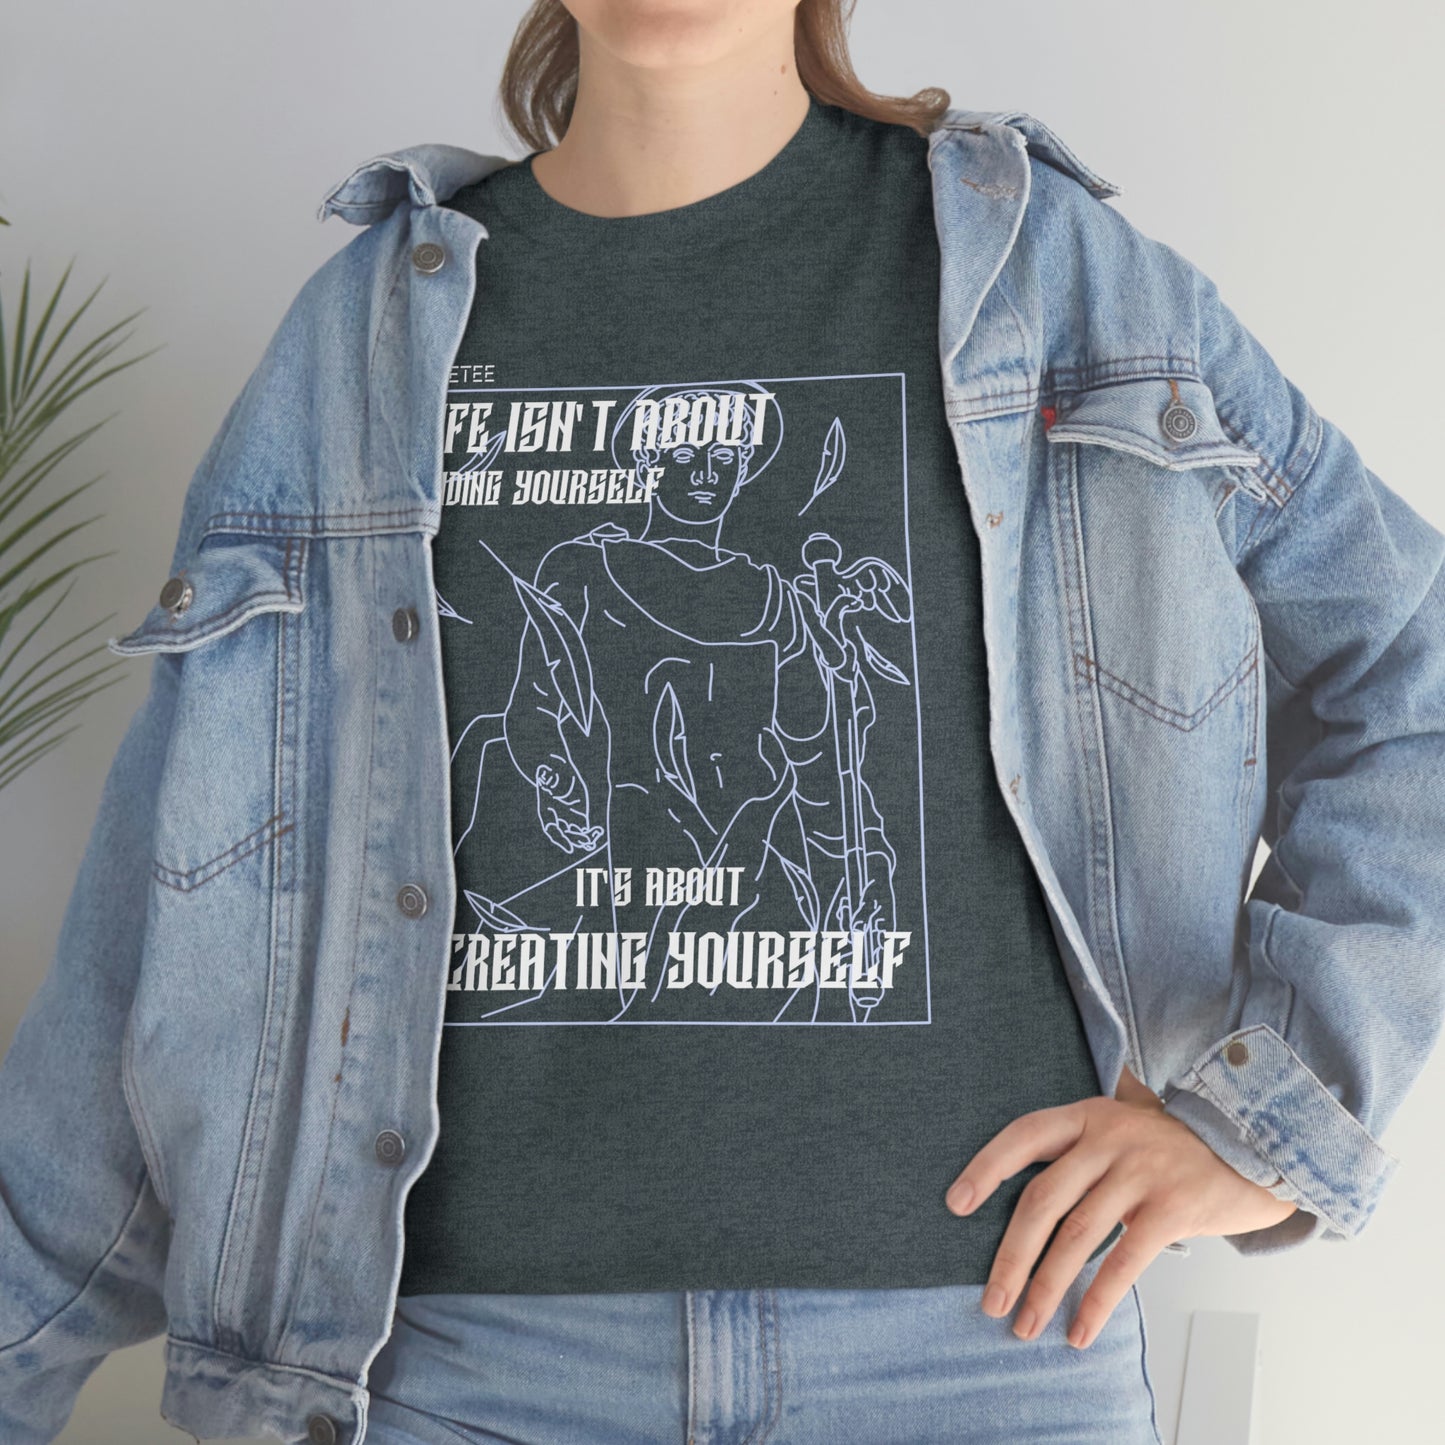 Creating Yourself T-Shirt